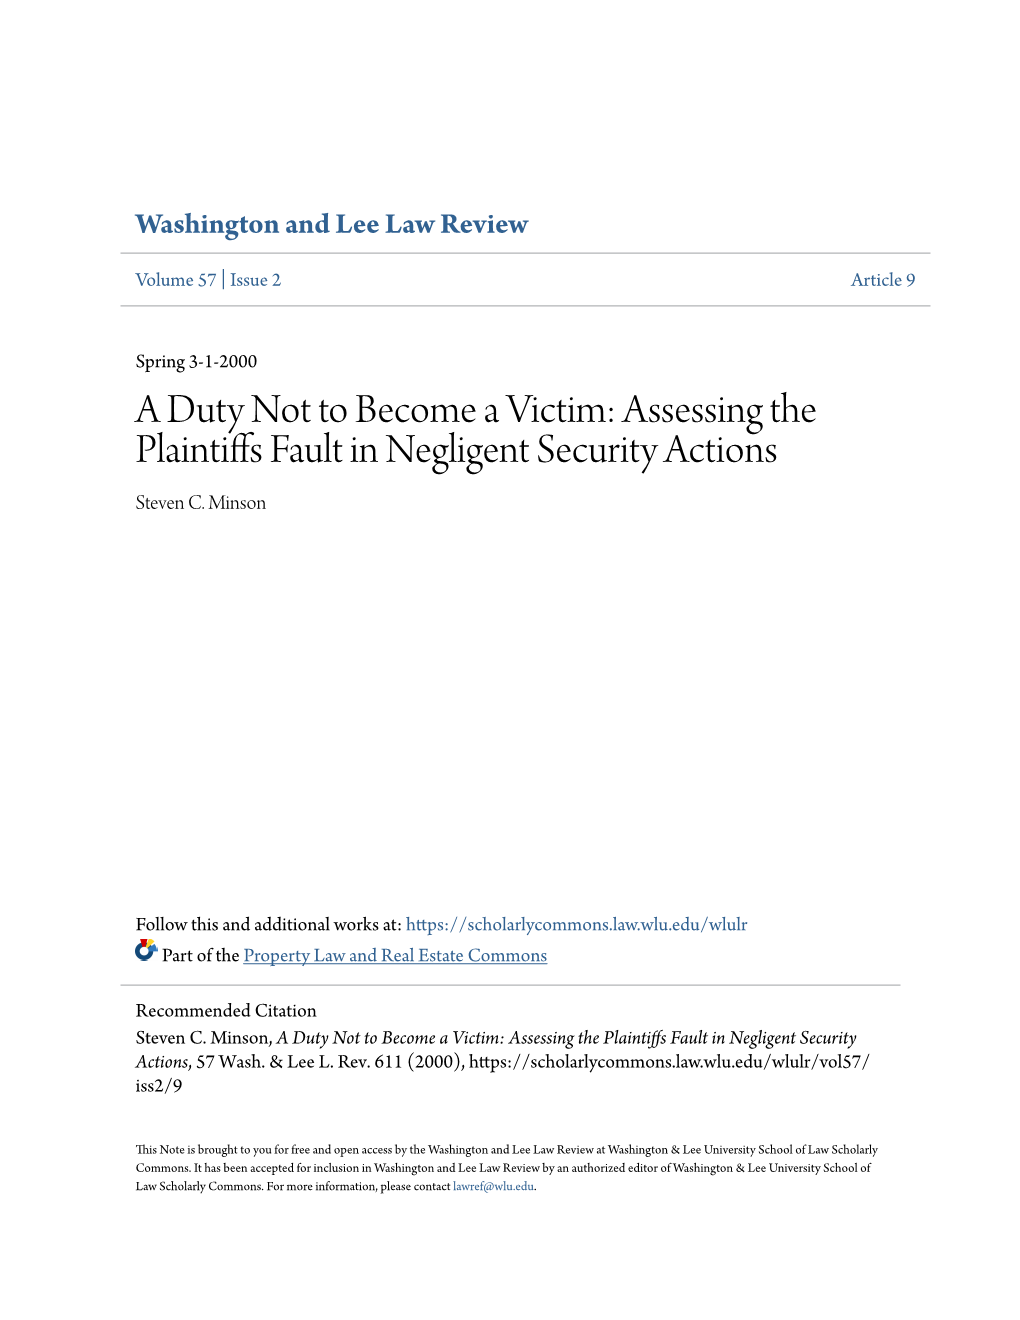 A Duty Not to Become a Victim: Assessing the Plaintiffs Fault in Negligent Security Actions Steven C